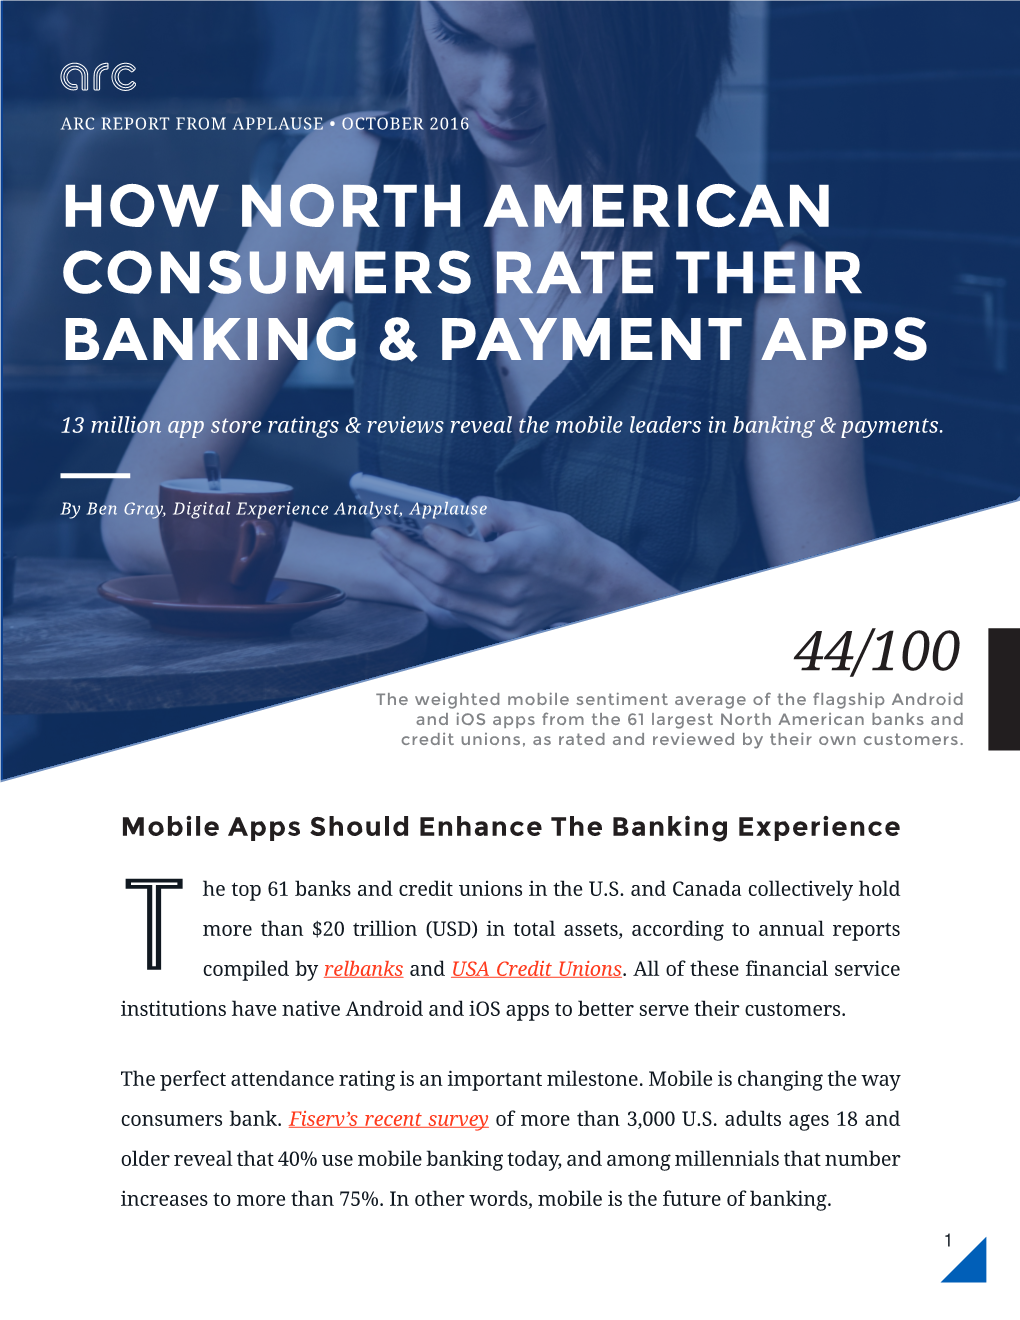 How North American Consumers Rate Their Banking & Payment Apps